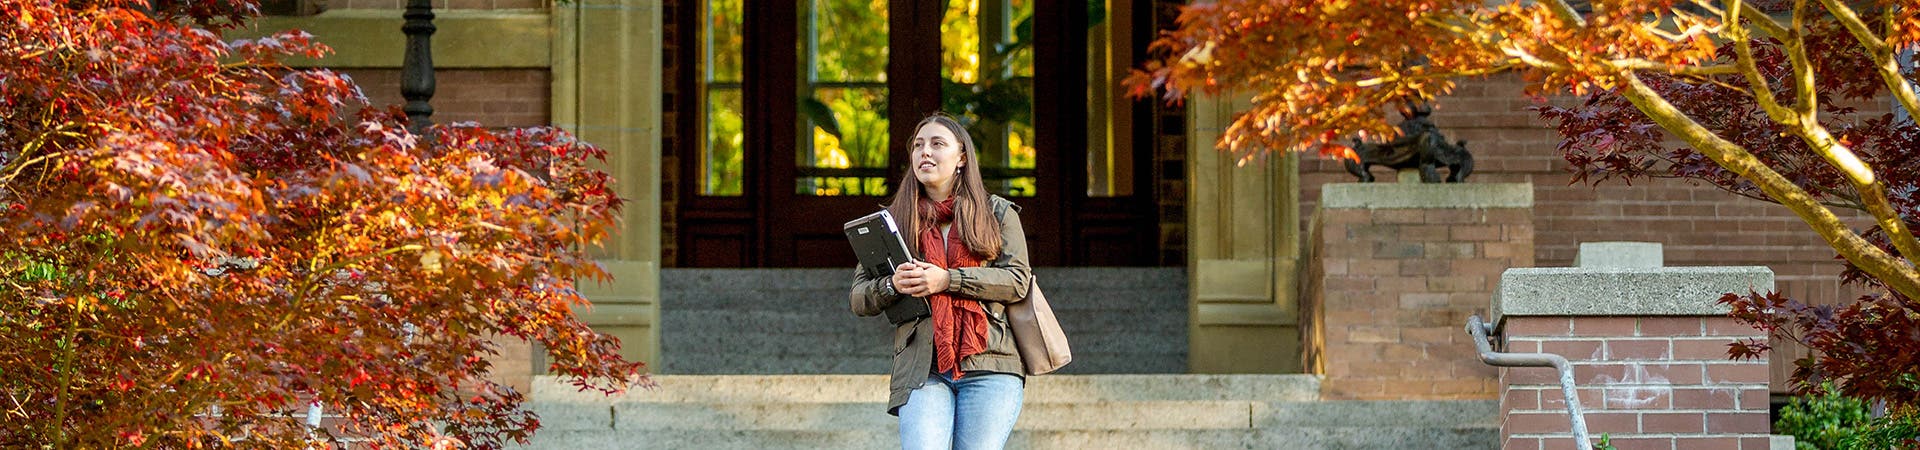 Student walking outside campus holding laptop